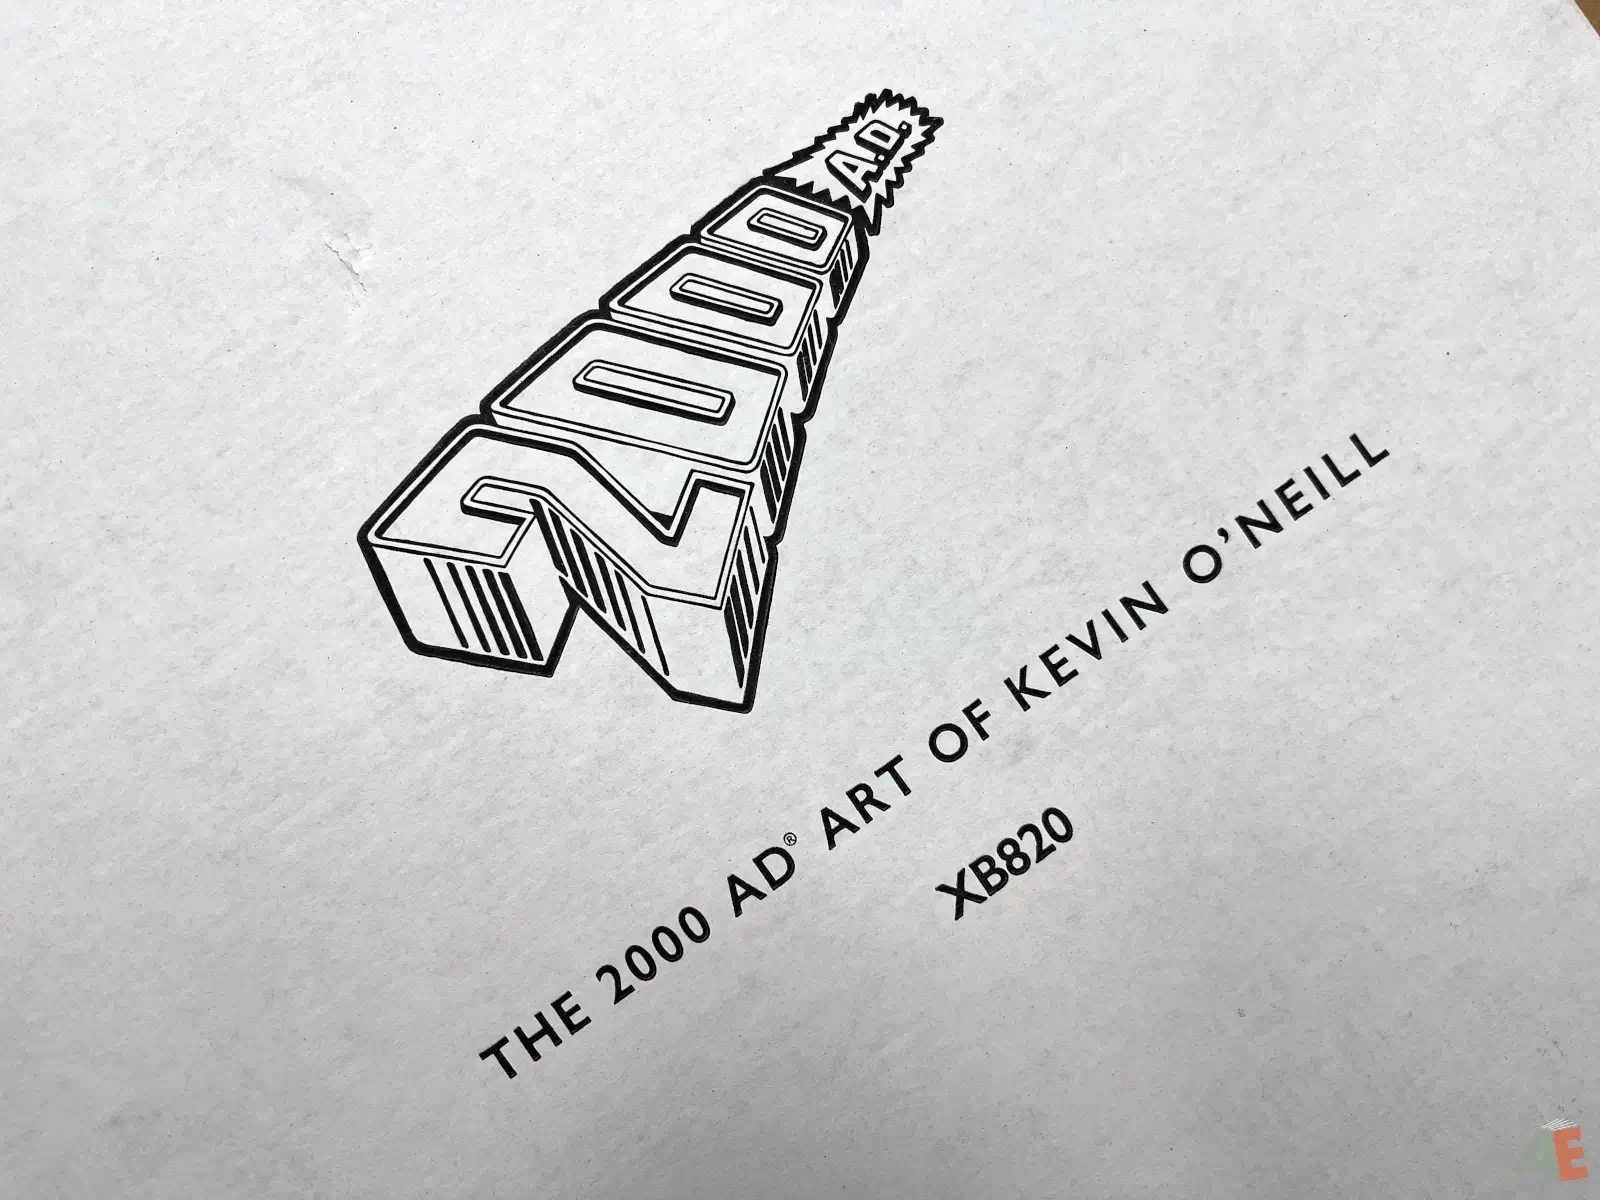 2000 AD Art of Kevin ONeill Apex Edition interior 25